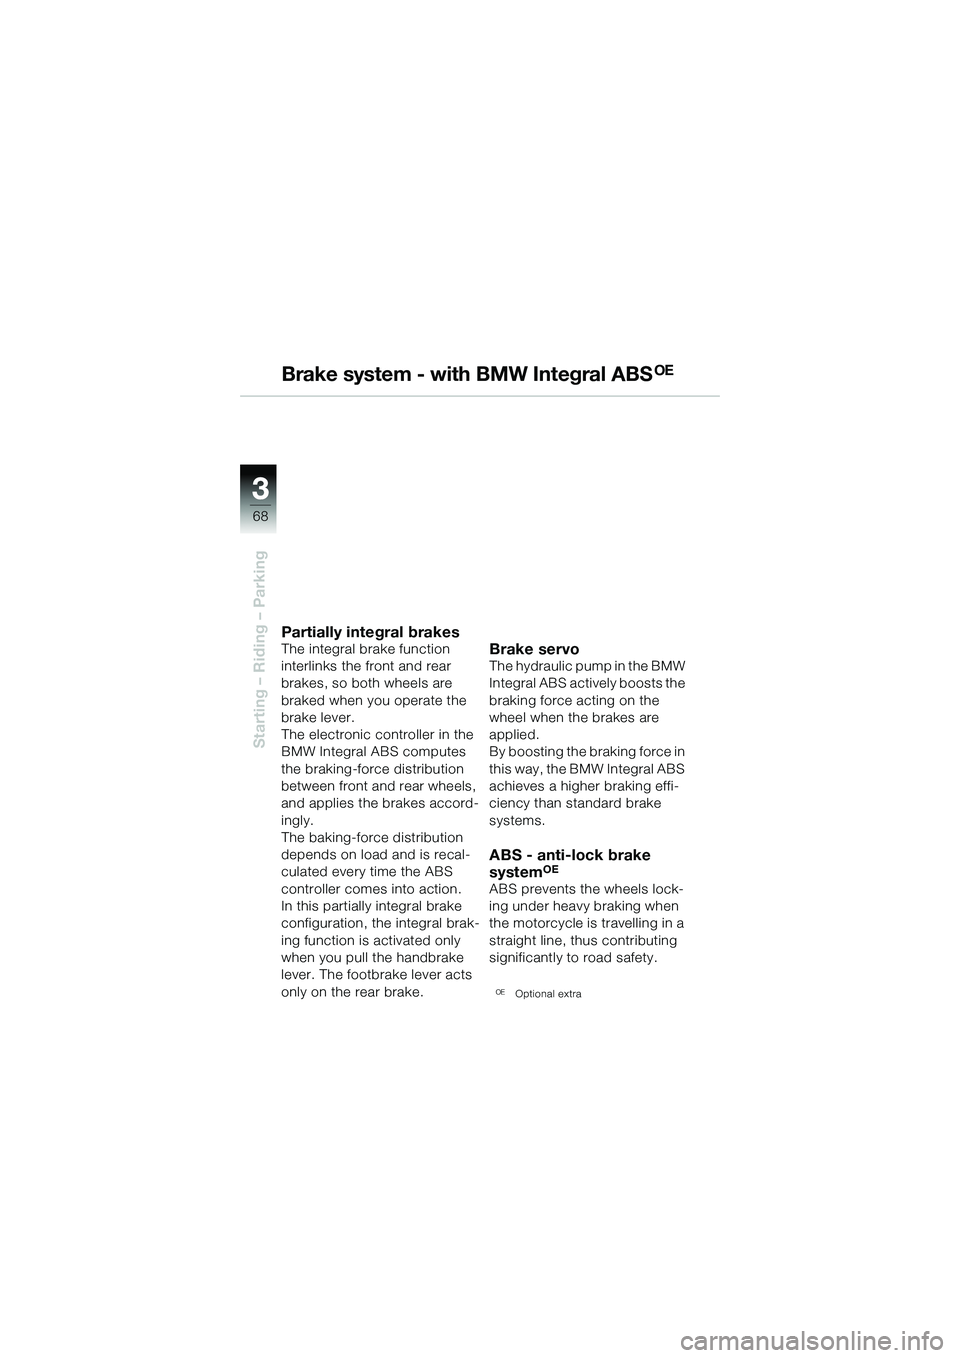 BMW MOTORRAD R 1150 R 2002  Riders Manual (in English) 33
68
Starting – Riding – Parking
Brake system - with BMW Integral ABSOE
Partially integral brakesThe integral brake function 
interlinks the front and rear 
brakes, so both wheels are 
braked whe